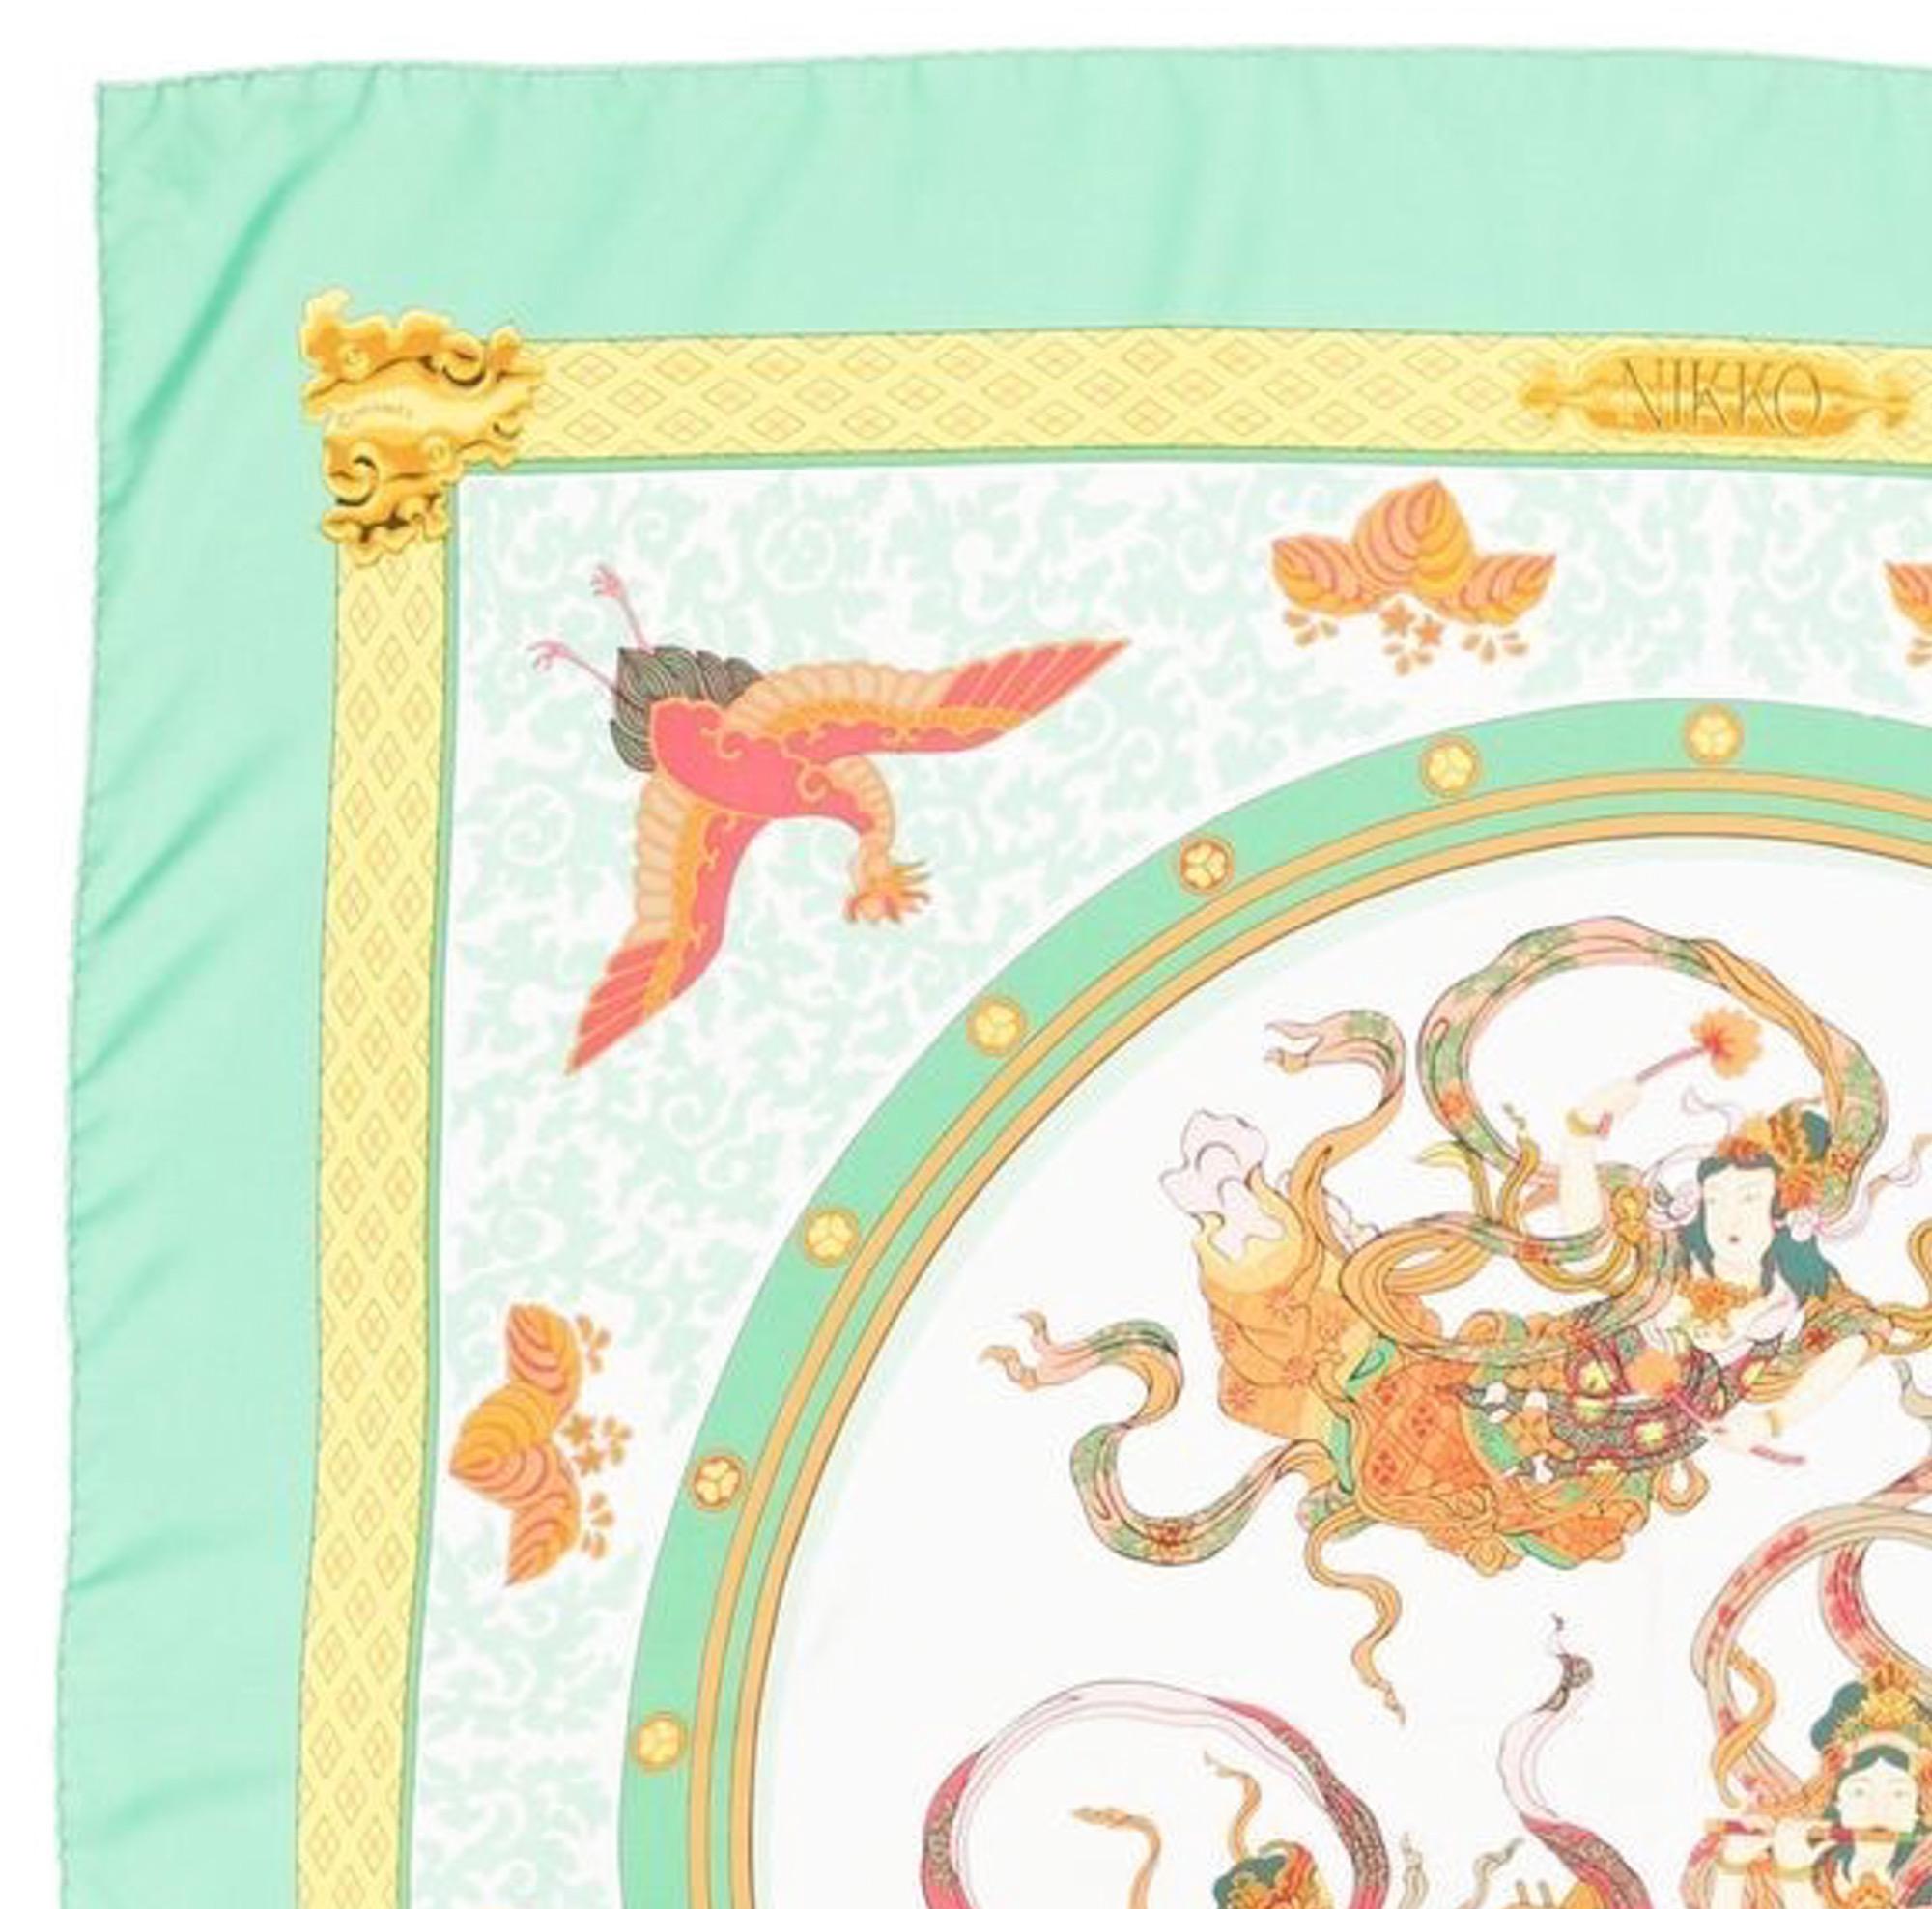 Hermes silk scarf Nikko by Dimitri Rybaltchenko featuring a green border. Circa 1995s.
In good vintage condition. Made in France.
35,4in. (90cm)  X 35,4in. (90cm)
We guarantee you will receive this  iconic item as described and showed on photos.